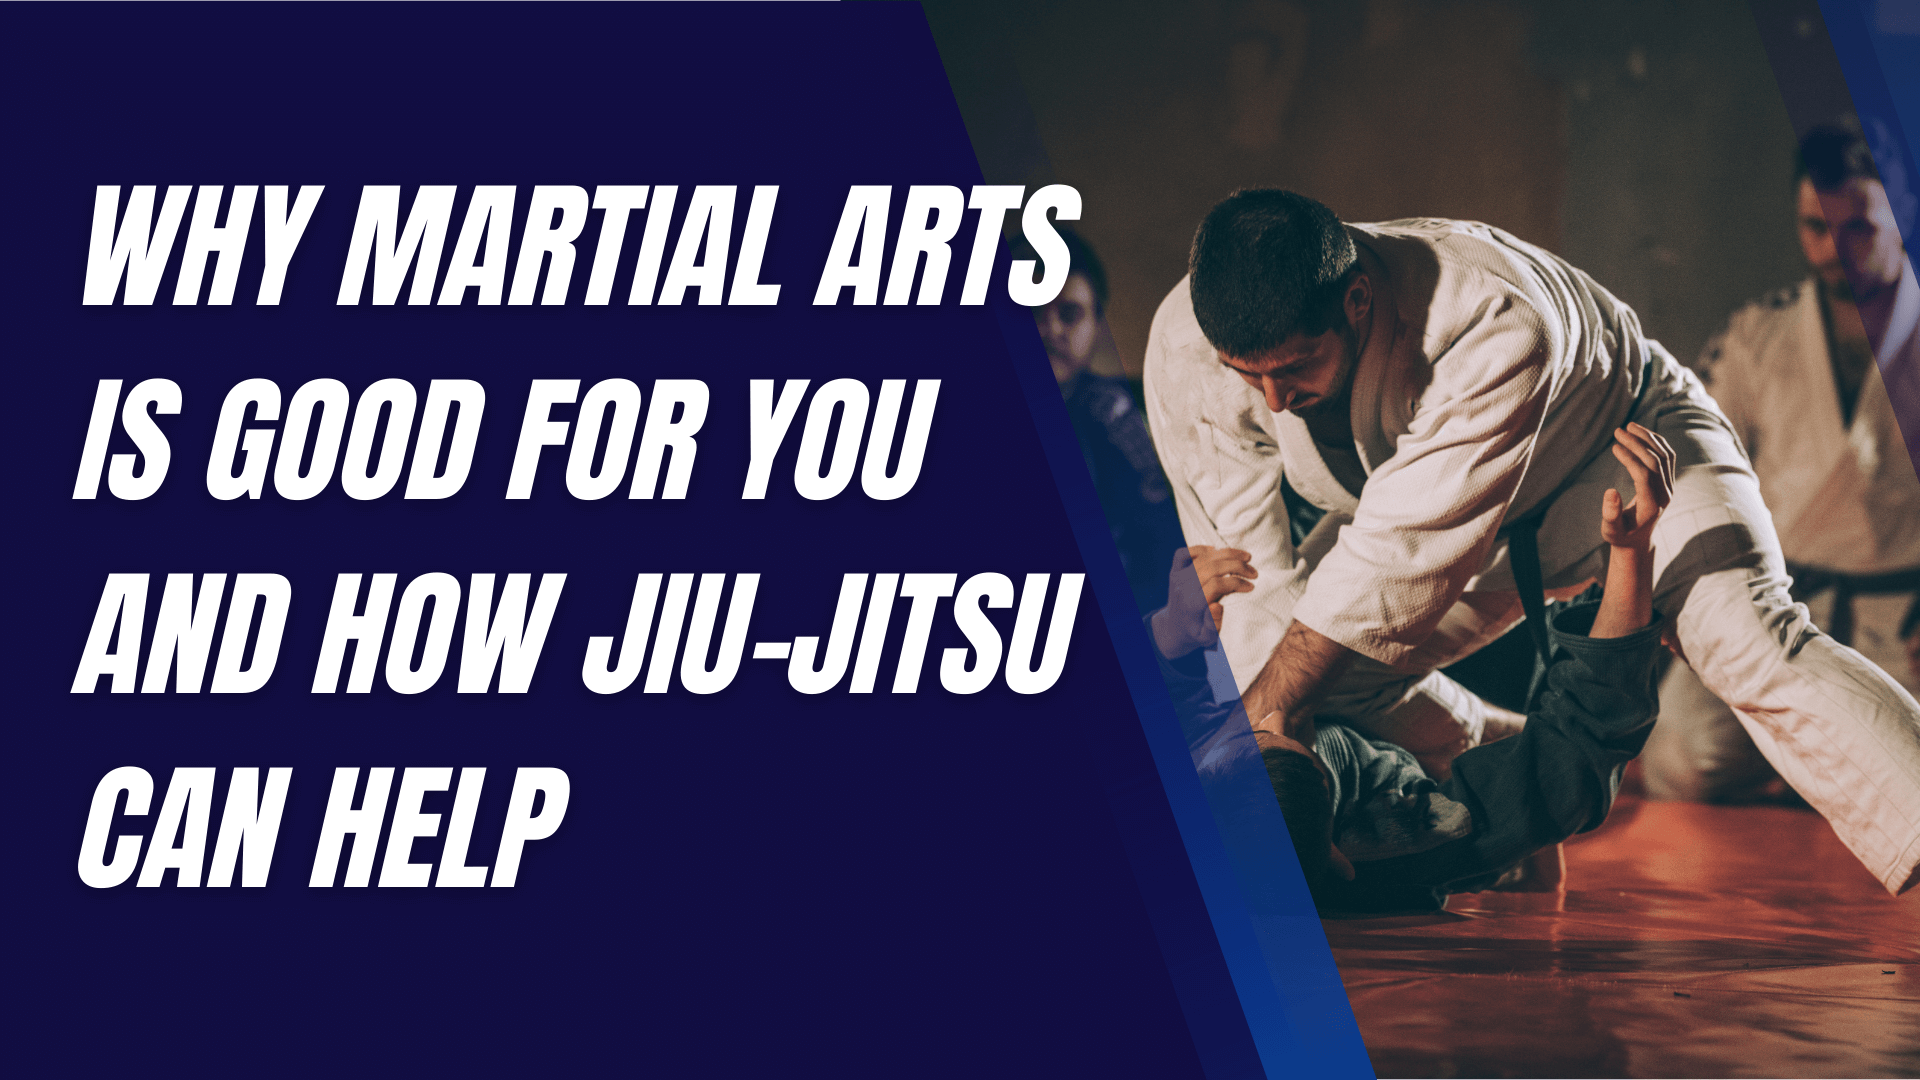 Why Martial Arts is Good for You and How Jiu-Jitsu Can Help